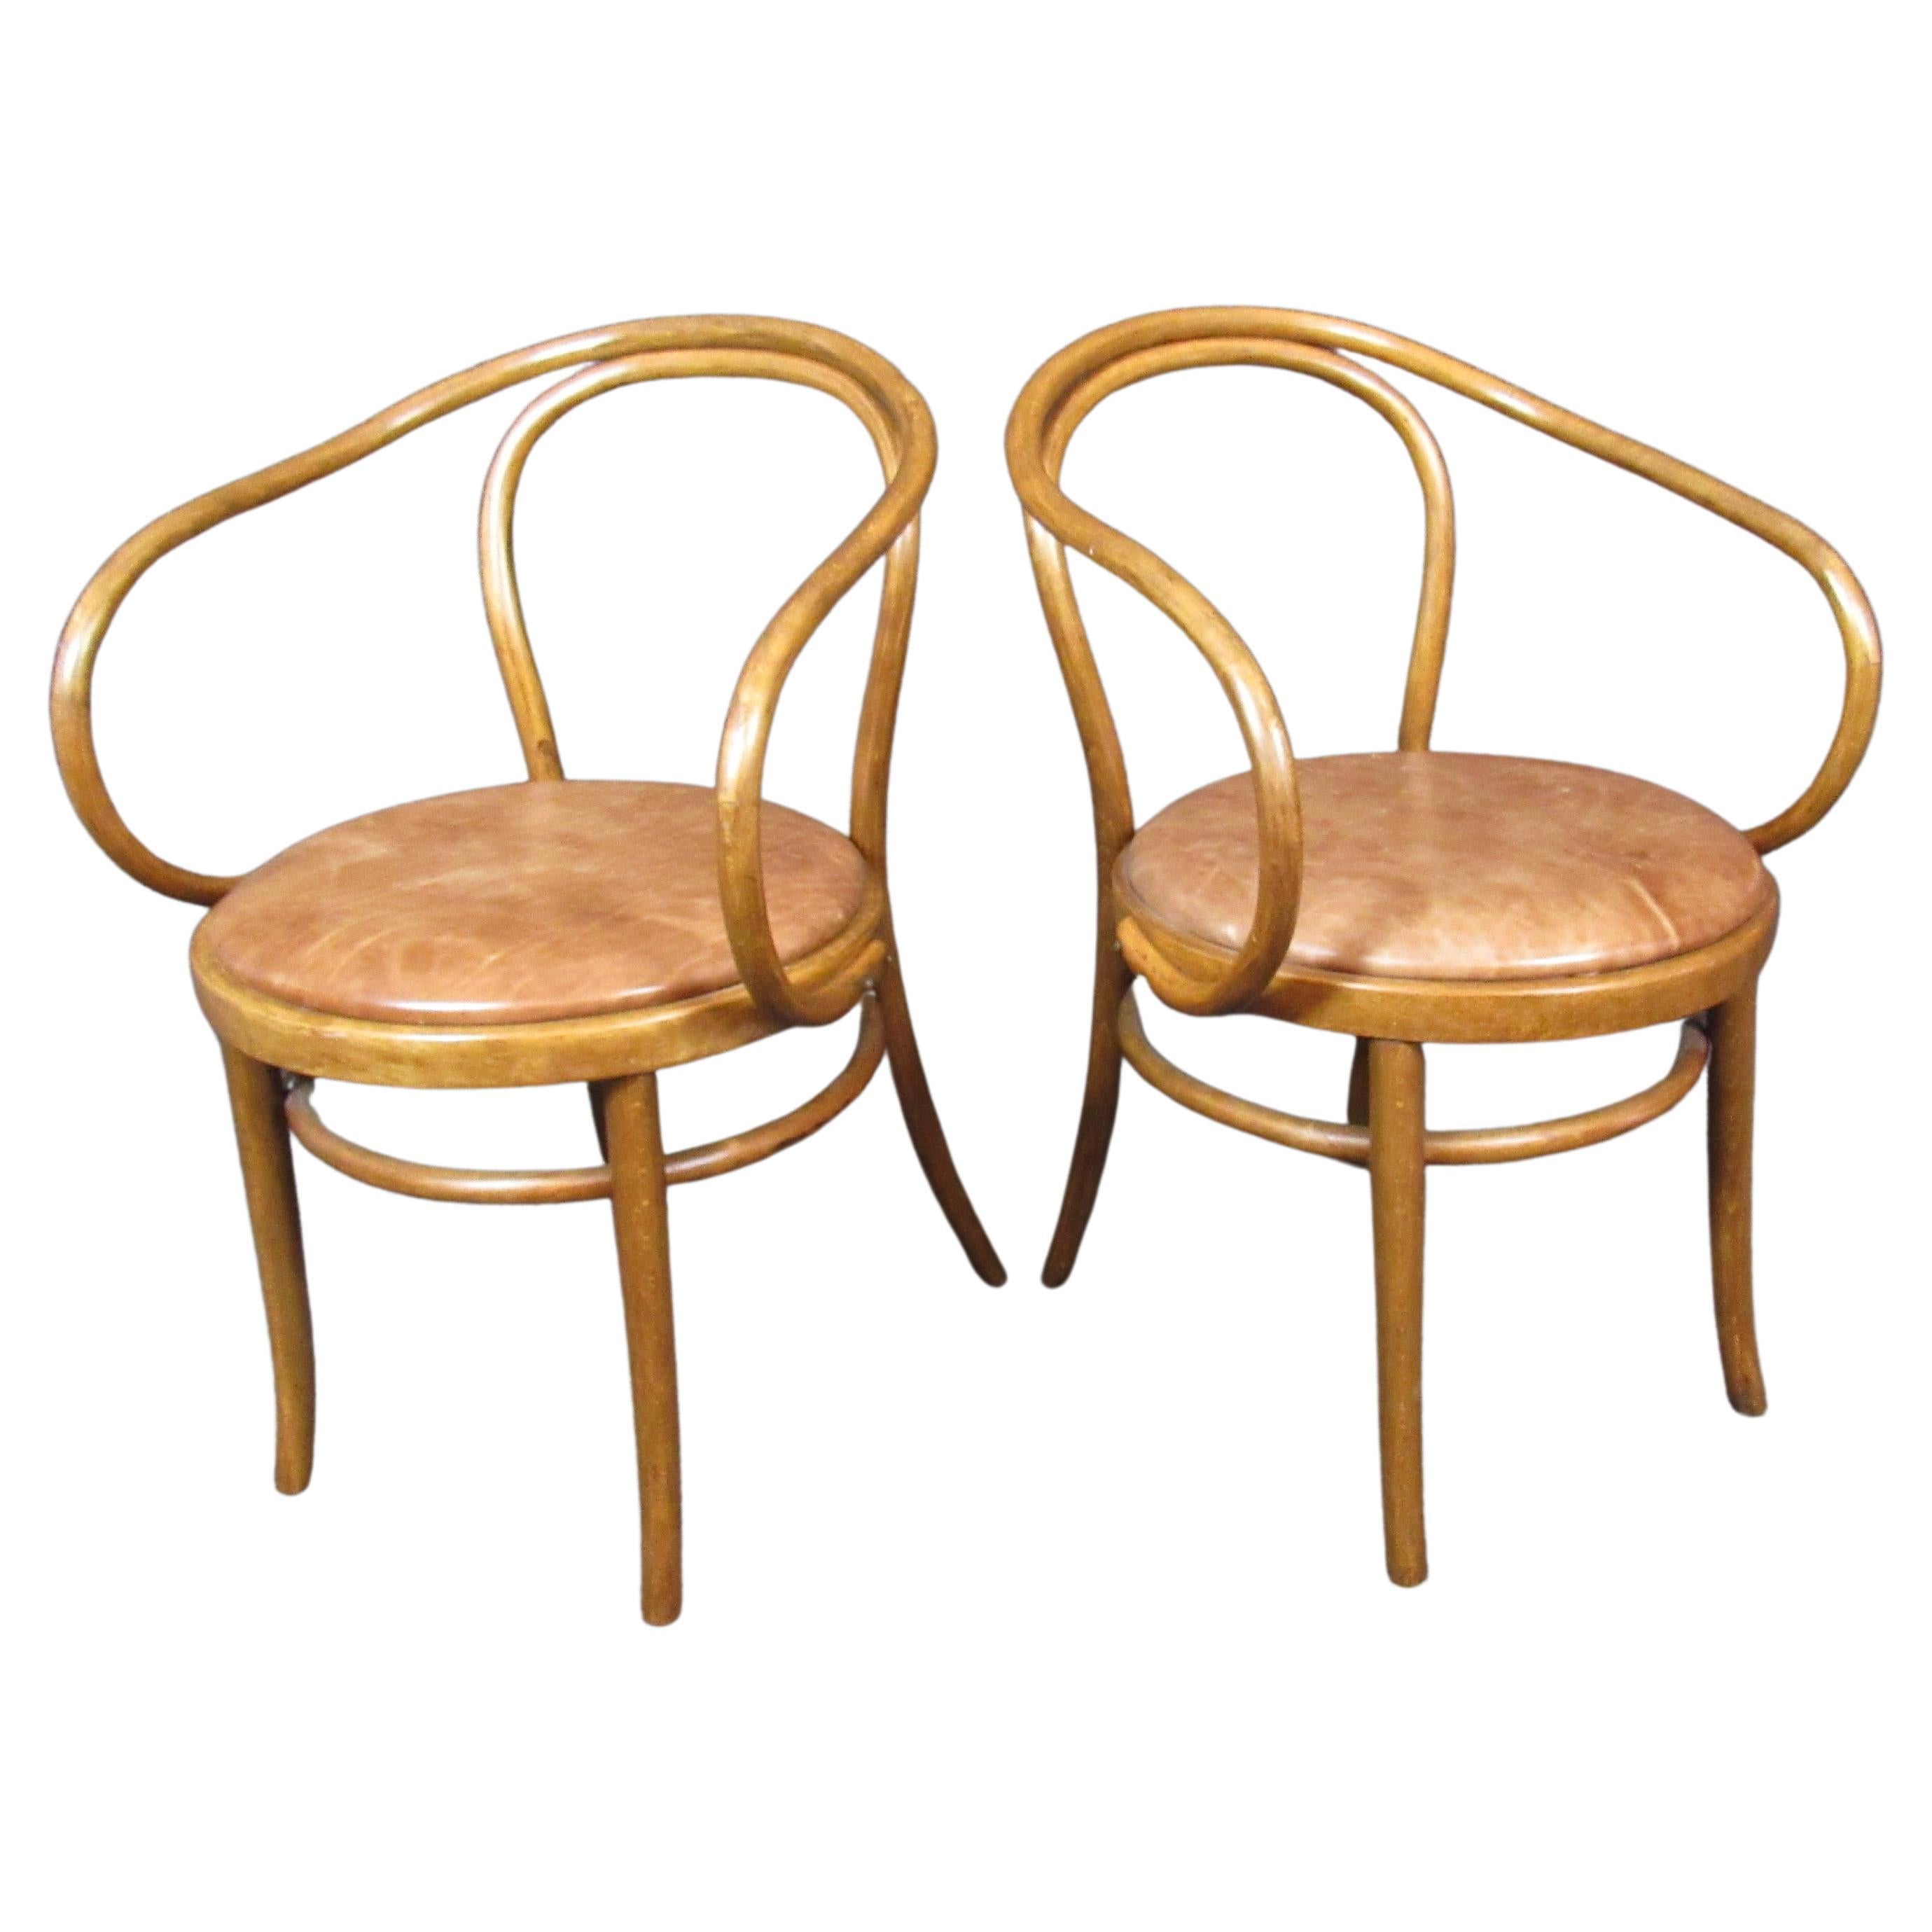 Pair of Vintage Thonet Bentwood Chairs